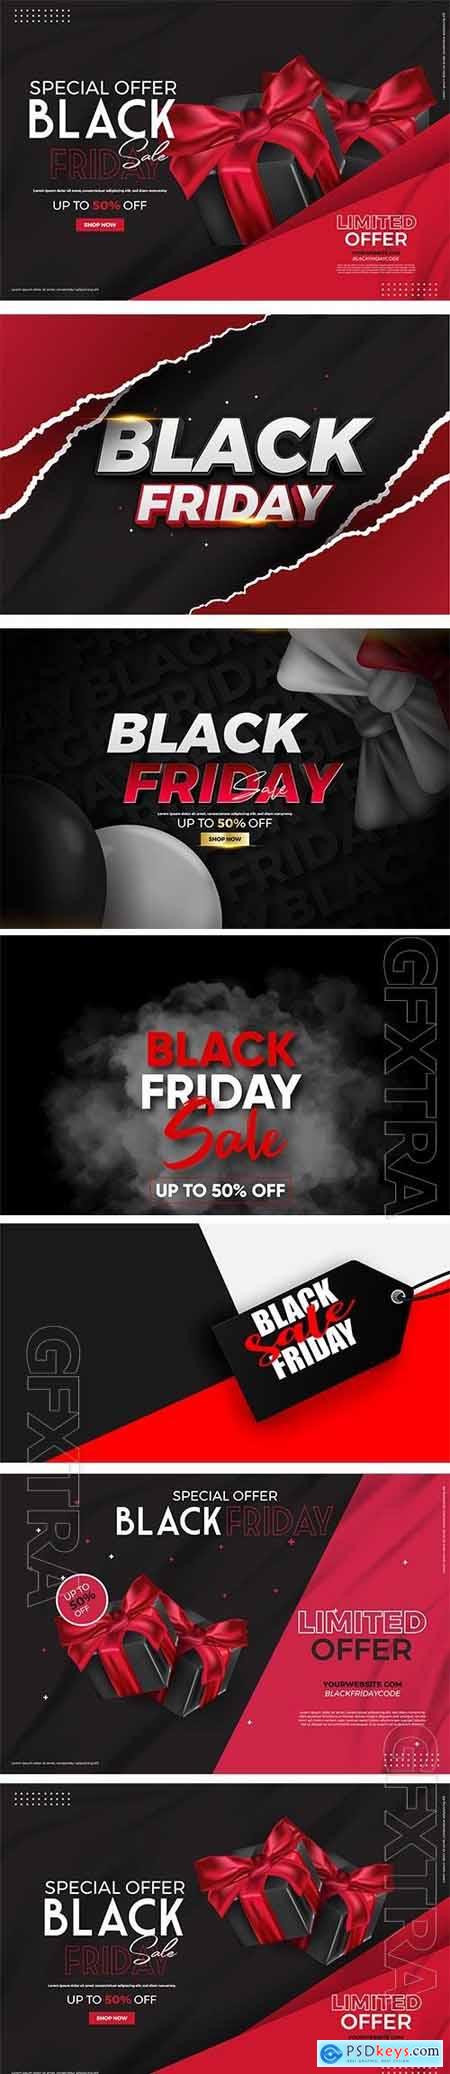 Black friday sale vector background with realistic 3d objects